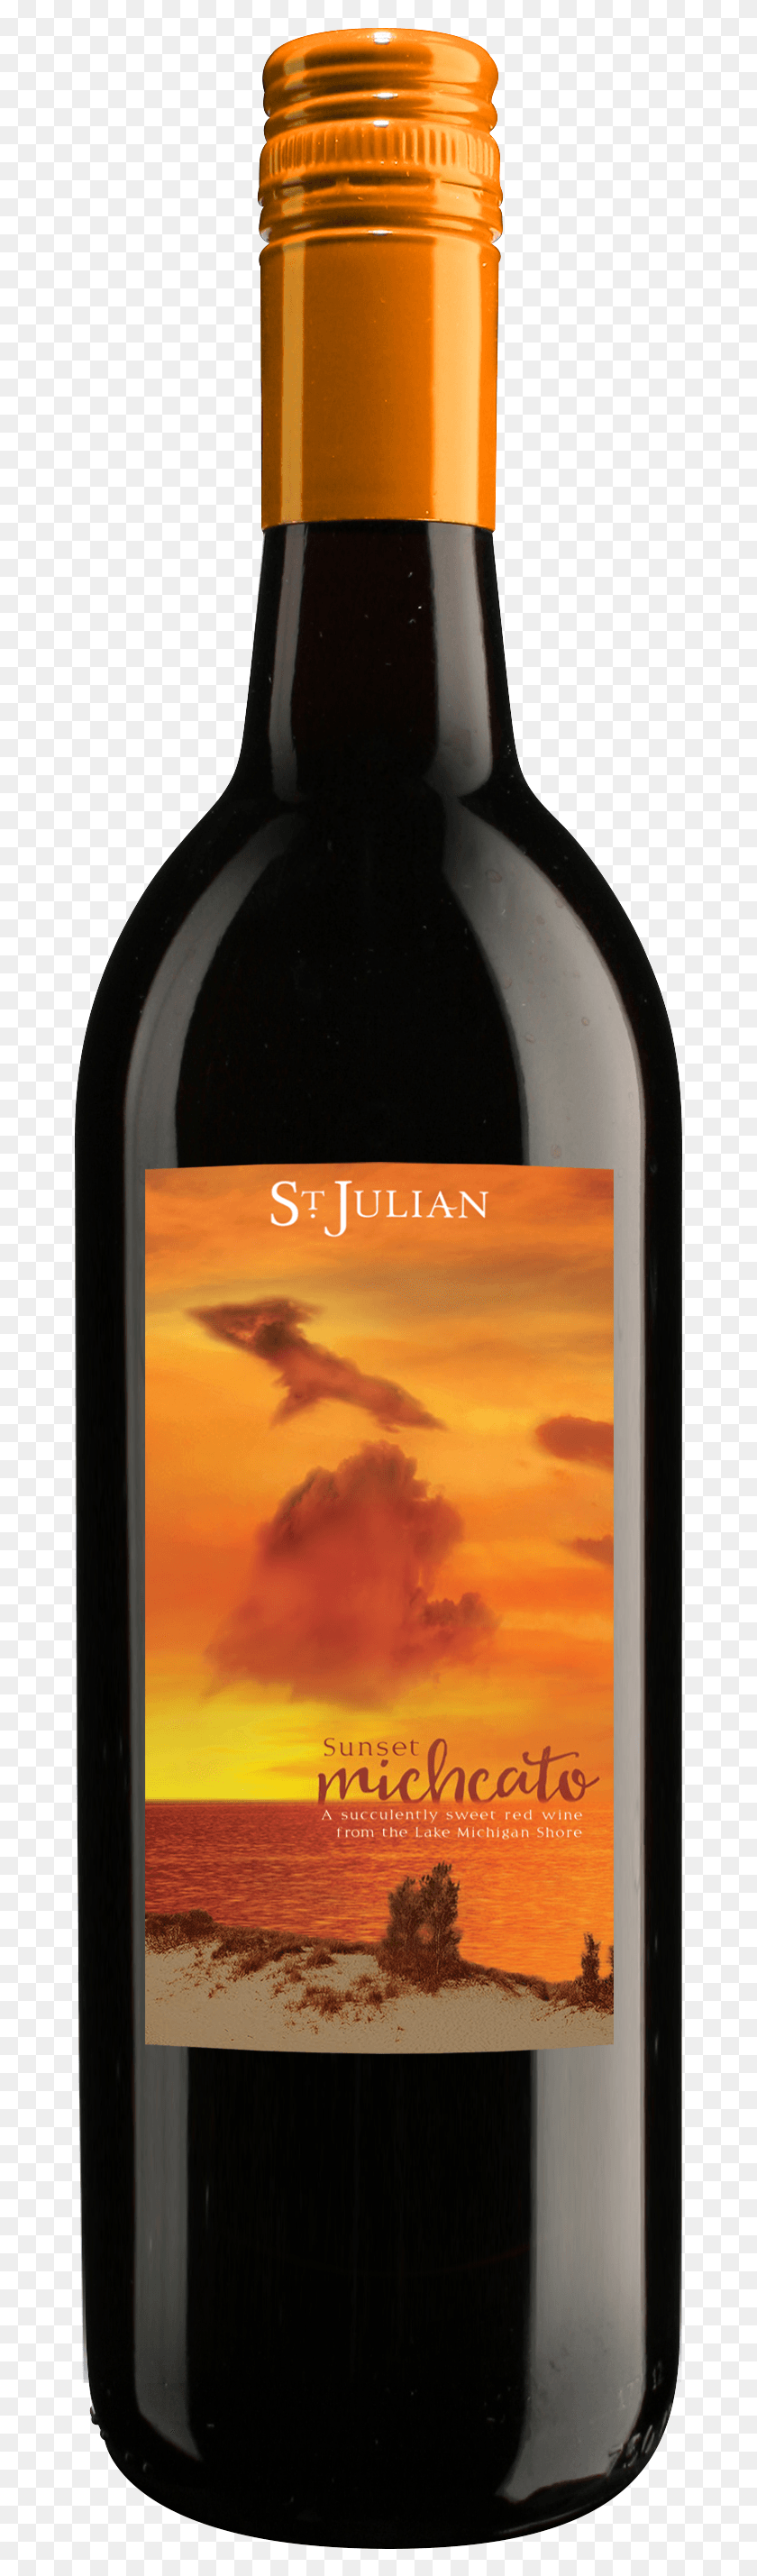 675x2798 St Julian Michcato, Wine, Alcohol, Beverage HD PNG Download